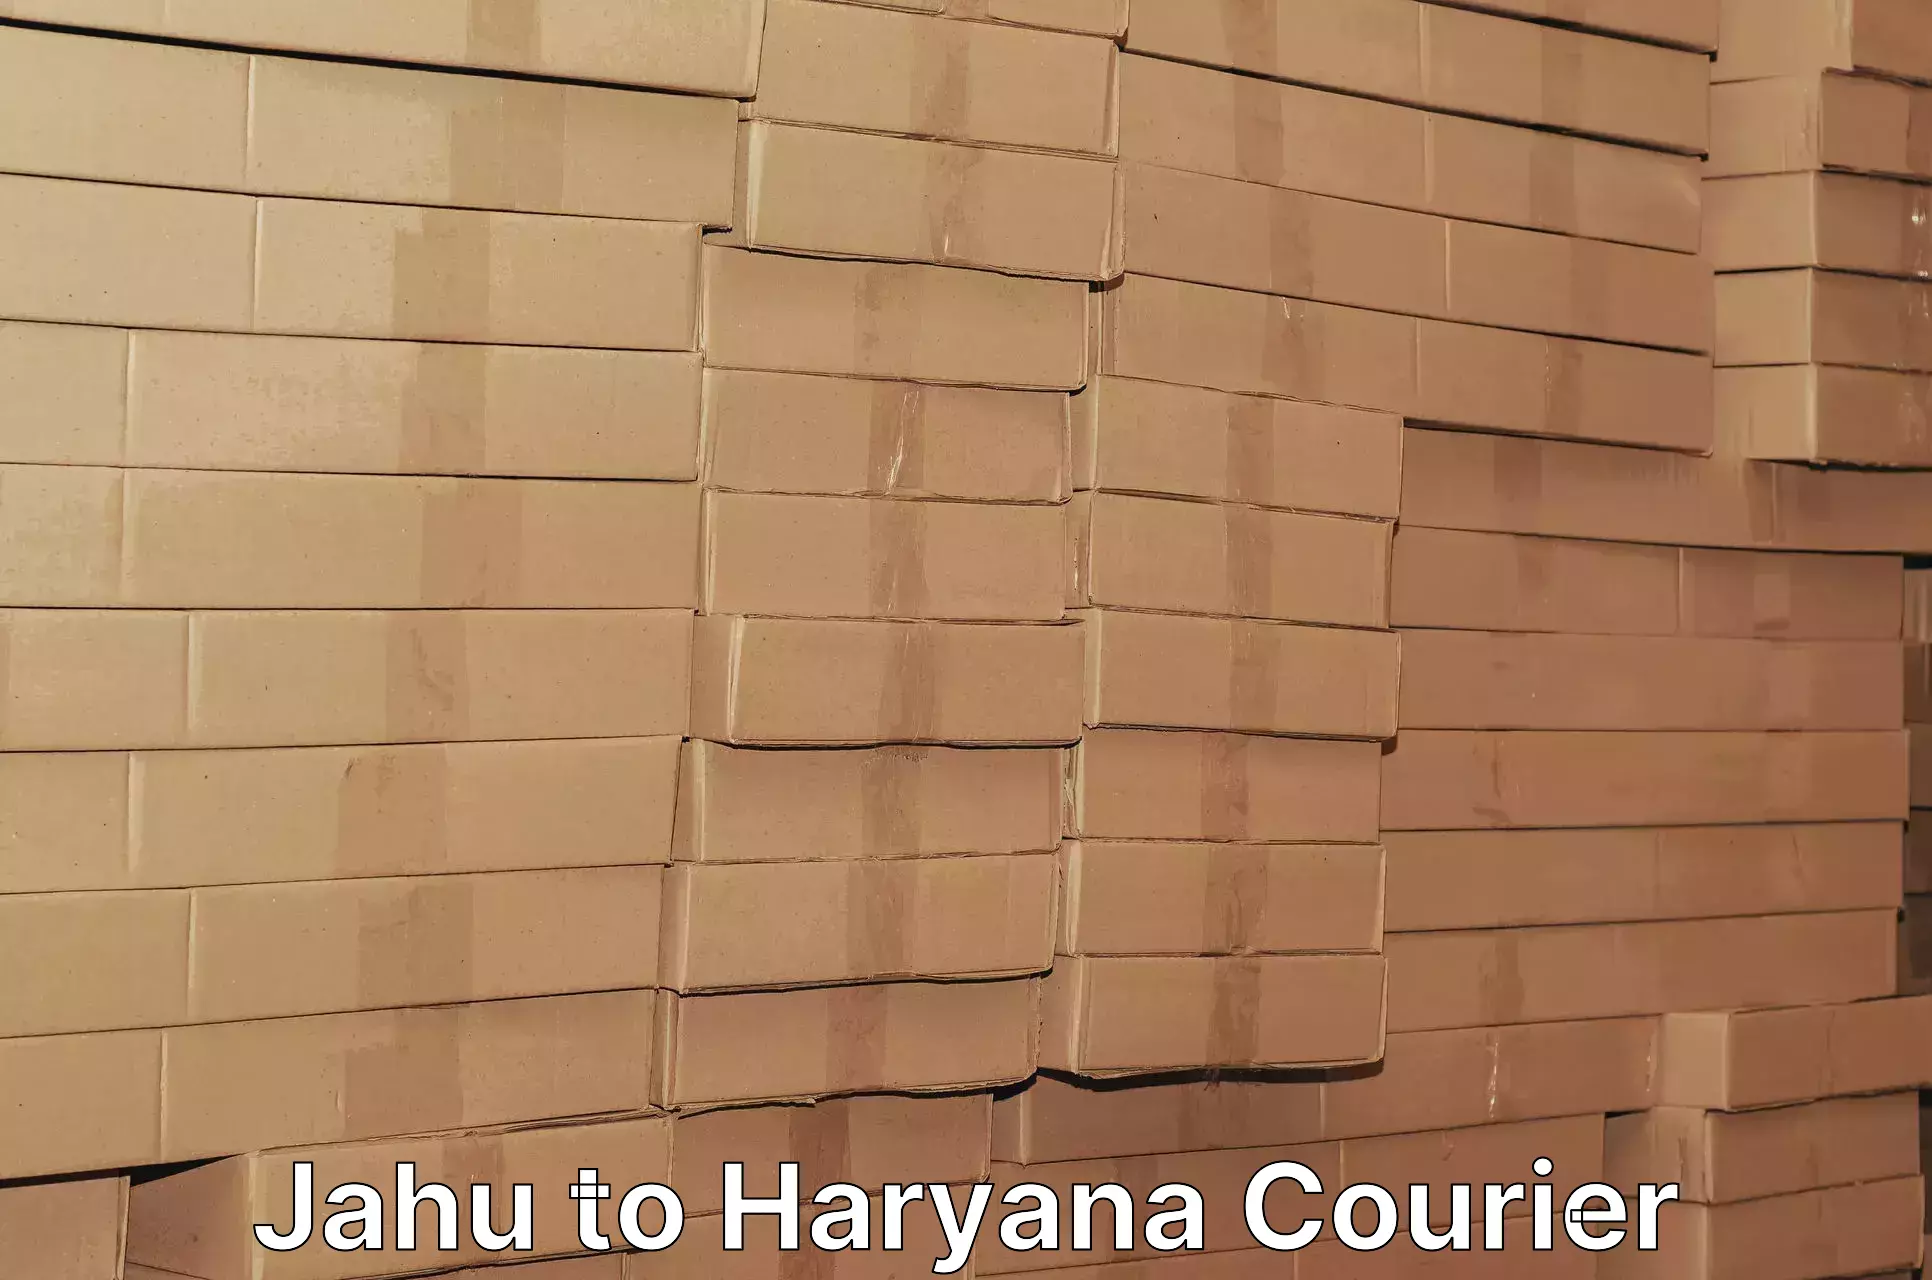 Package delivery network Jahu to Haryana